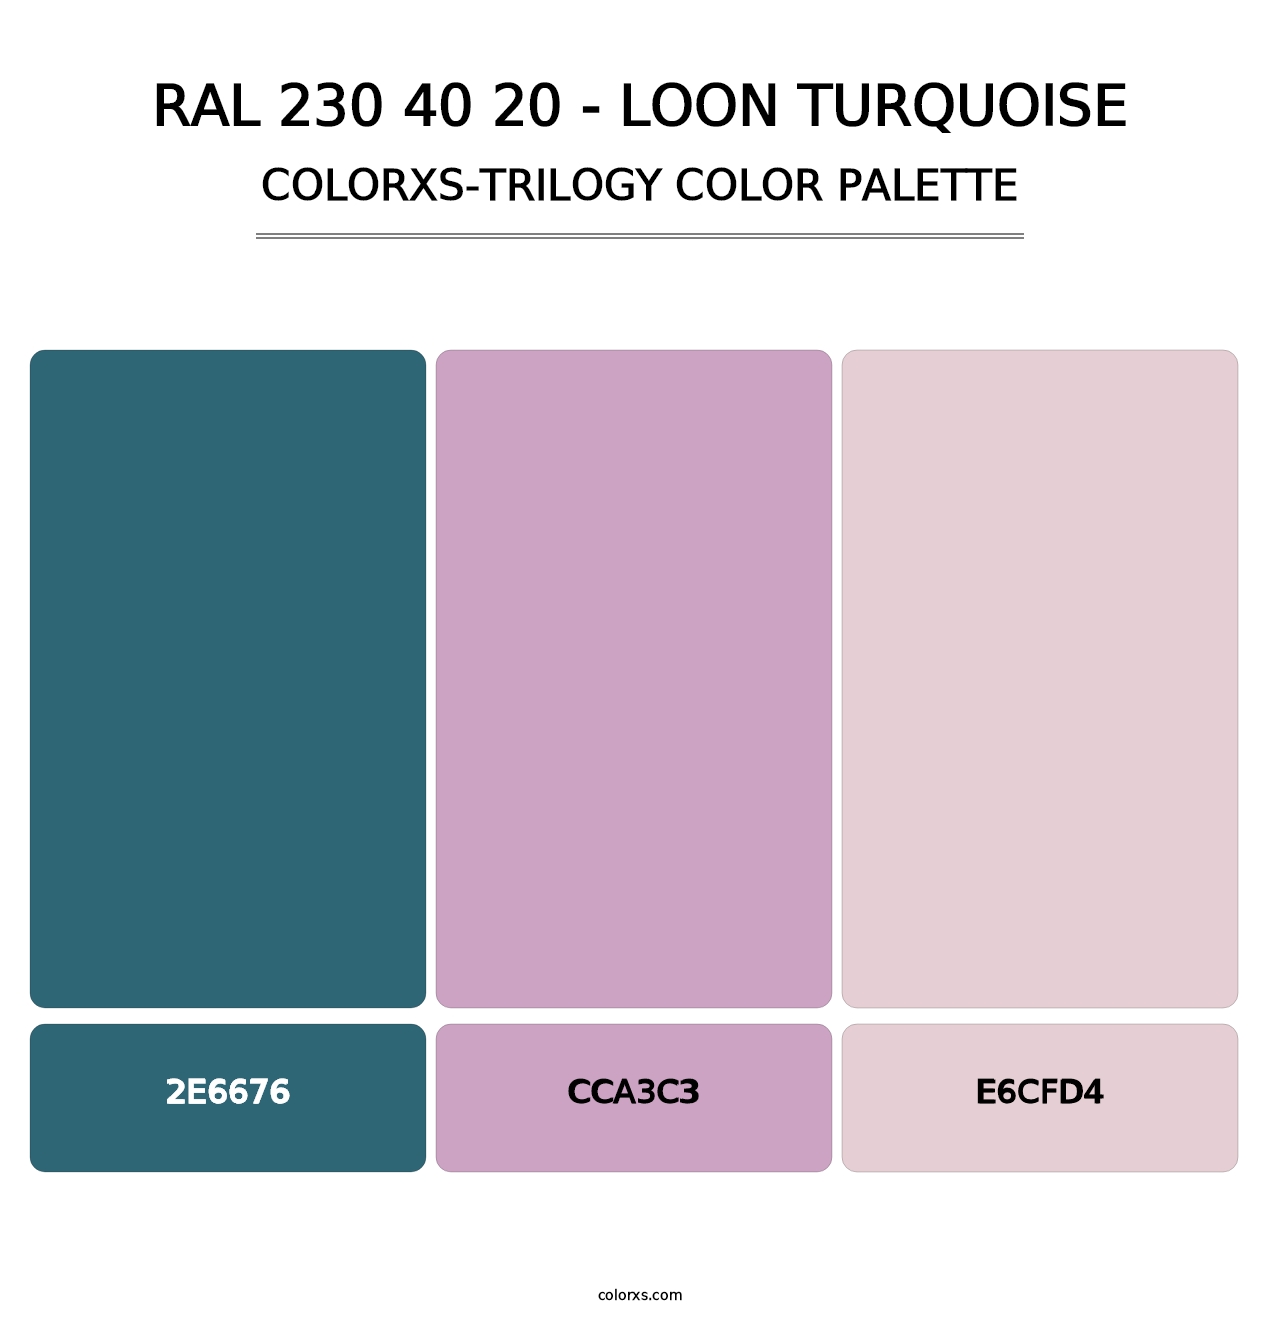 RAL 230 40 20 - Loon Turquoise - Colorxs Trilogy Palette